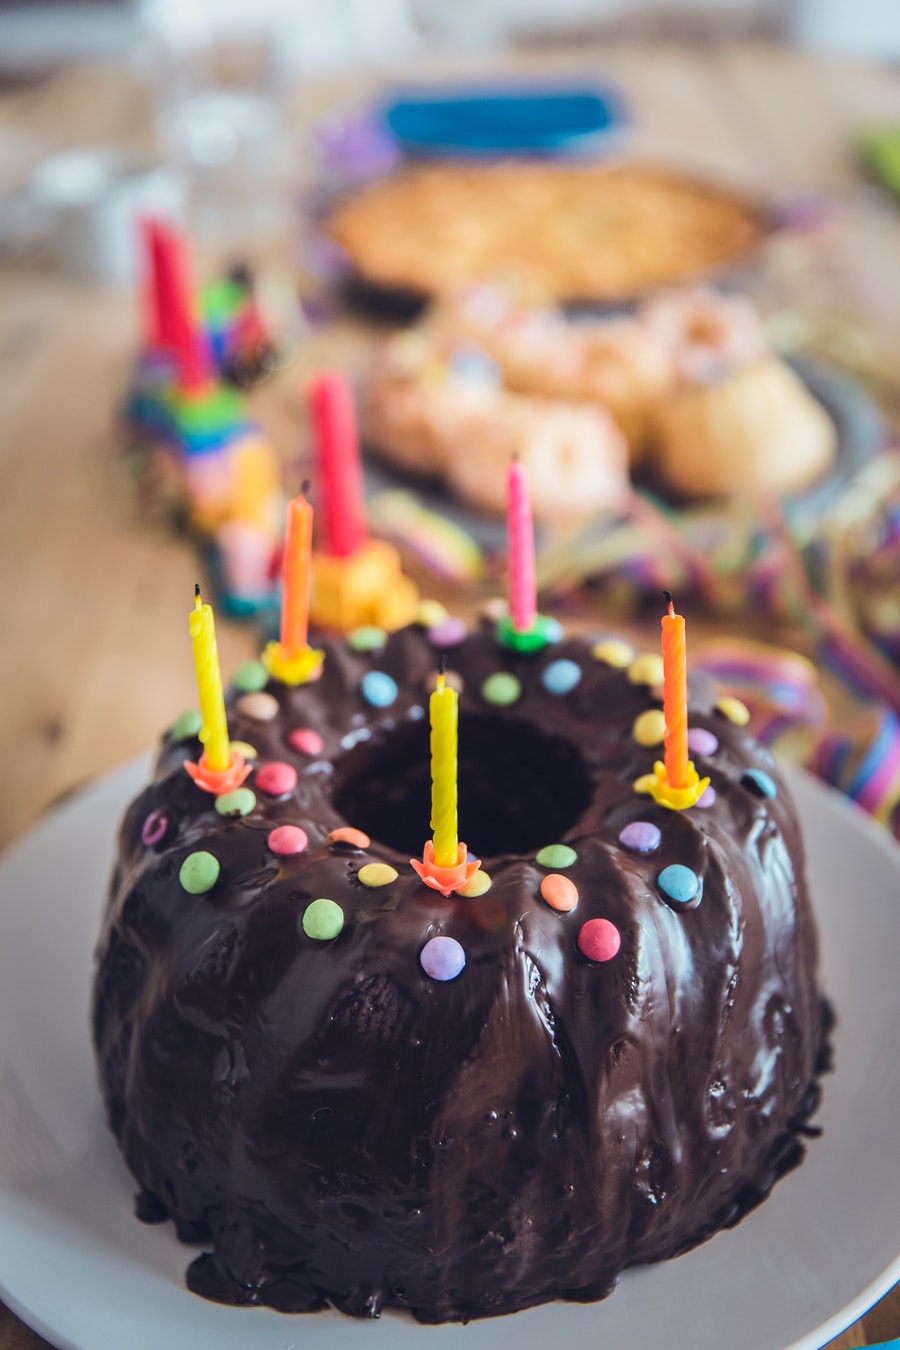 If you have a milestone birthday coming up and are wondering how to make it special even if you celebrate at  home, here are some ideas to get you started.